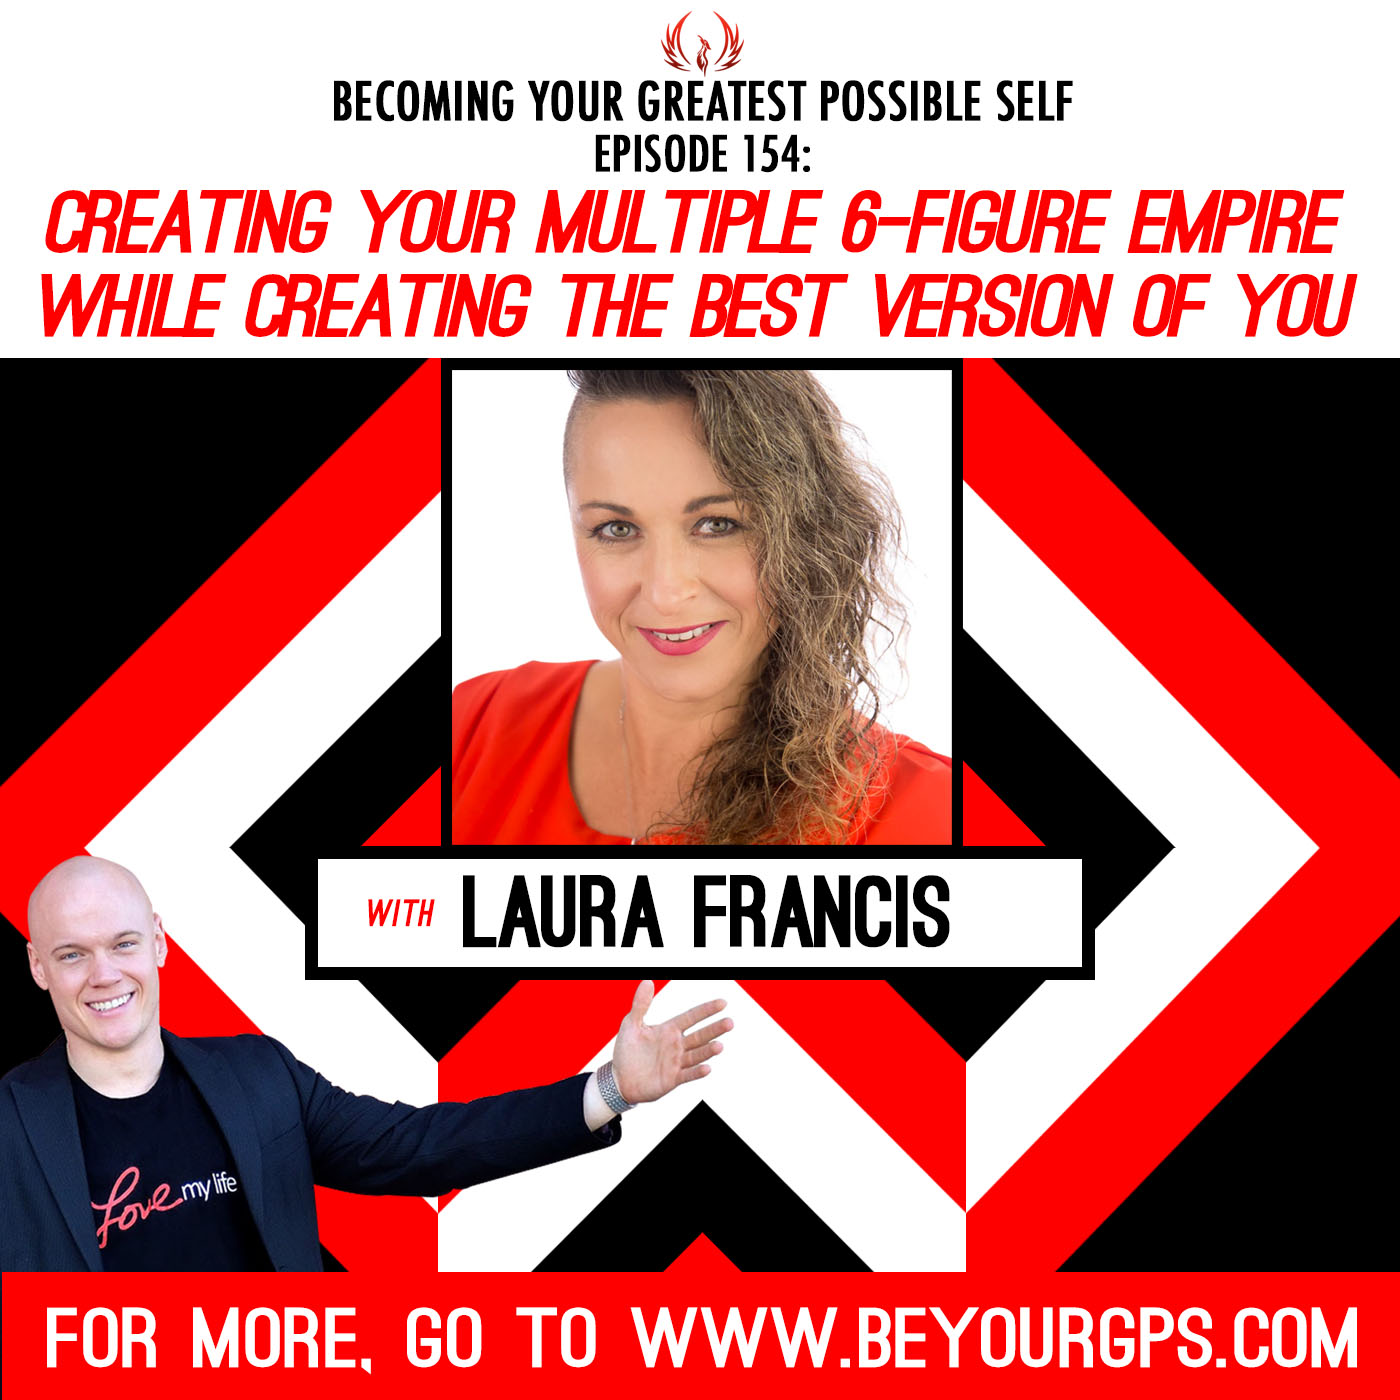 Creating Your Multiple 6-Figure Empire While Creating The Best Version of You with Laura Francis